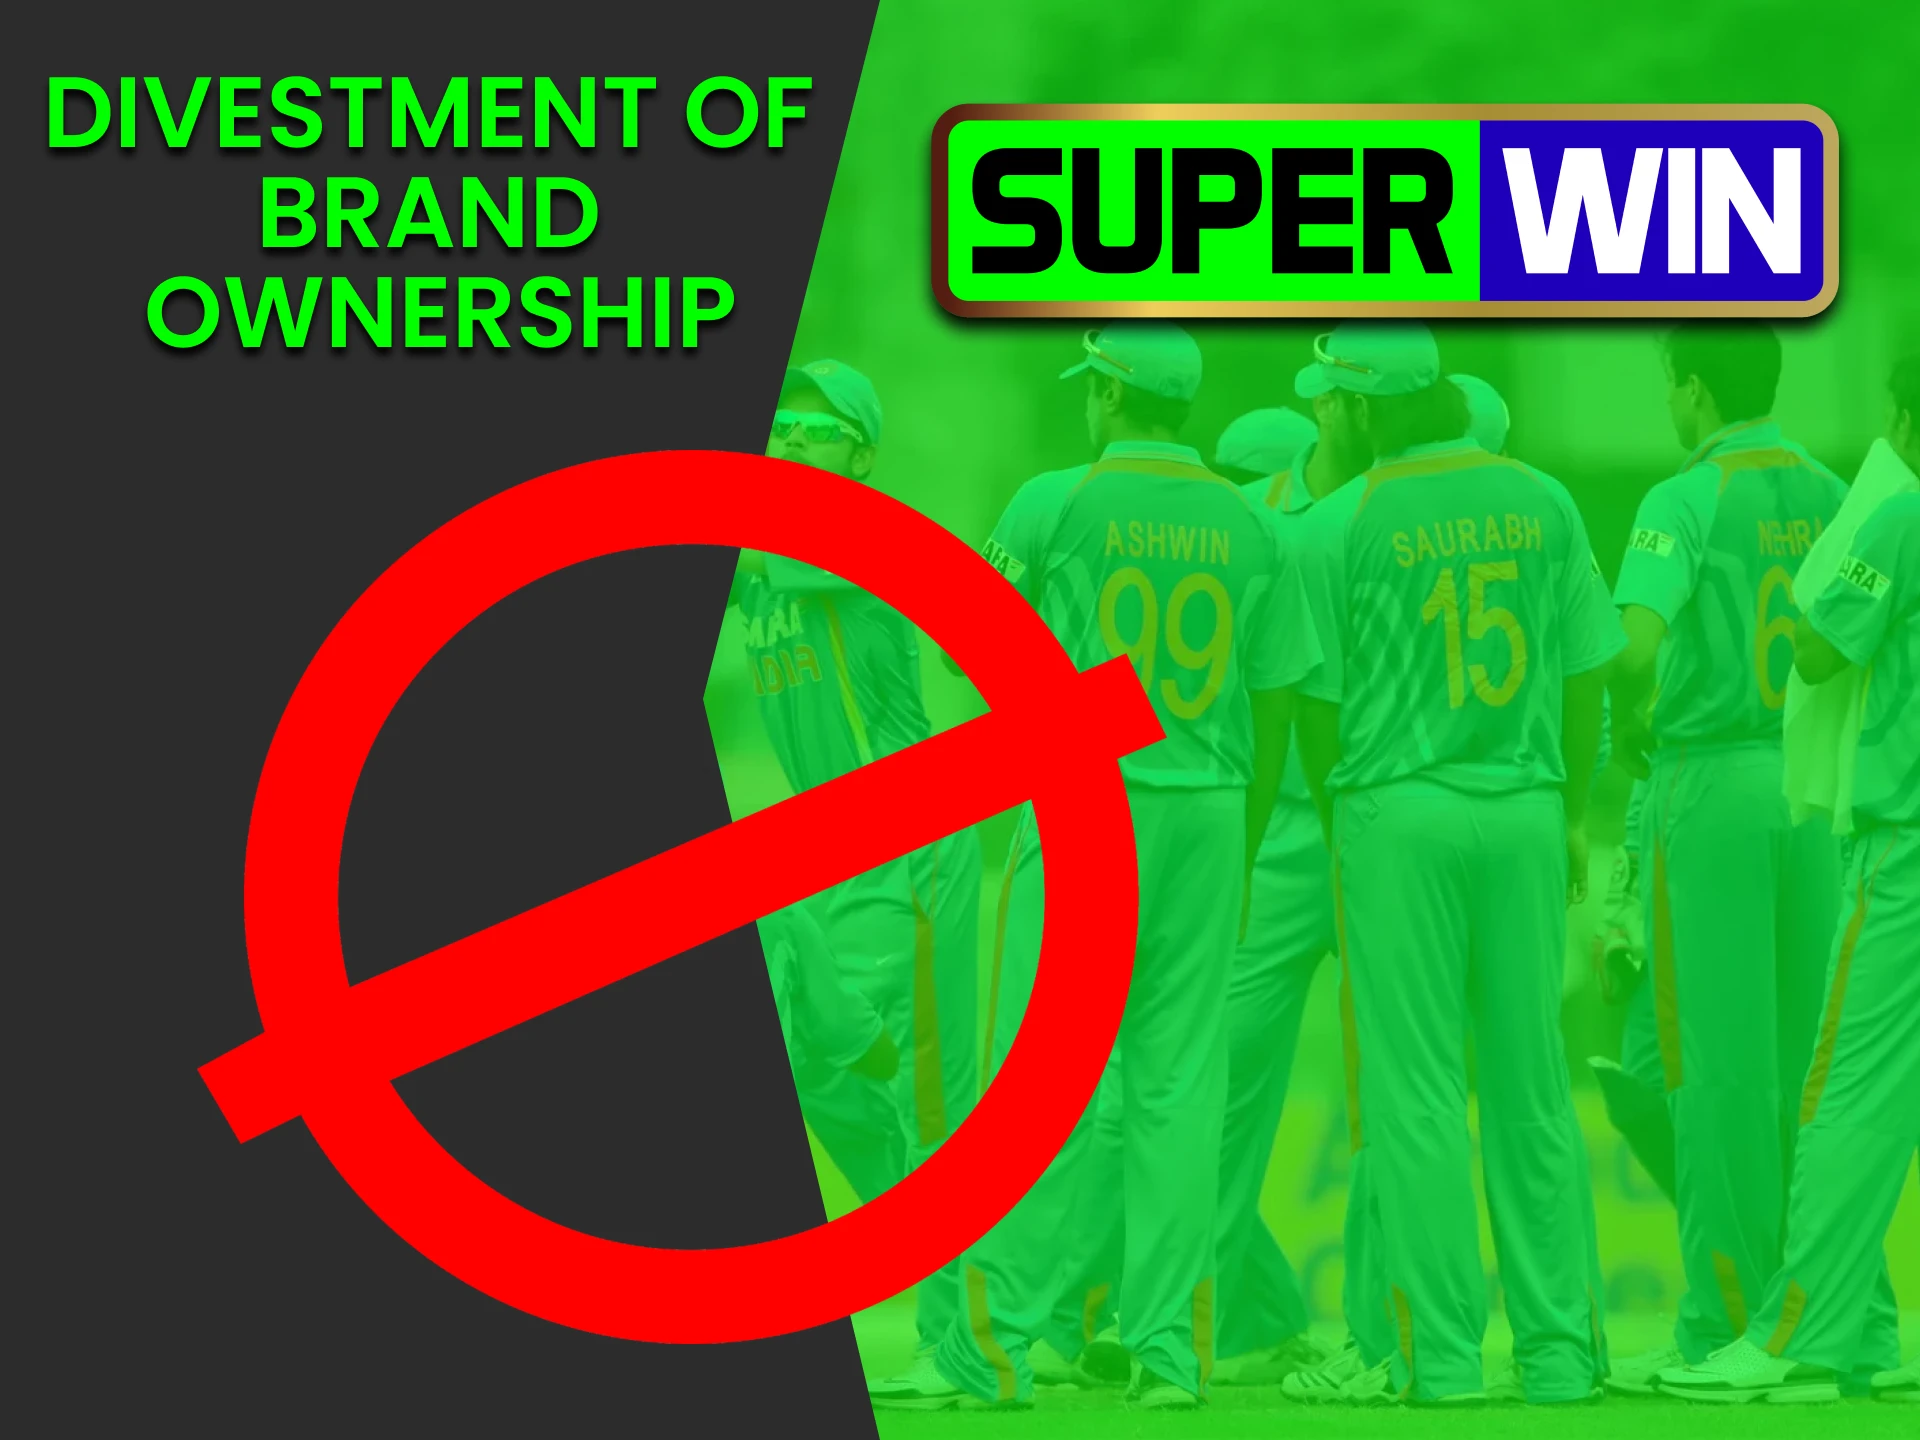 We will tell you who owns the Superwin company and what the gambling commission has to do with it.